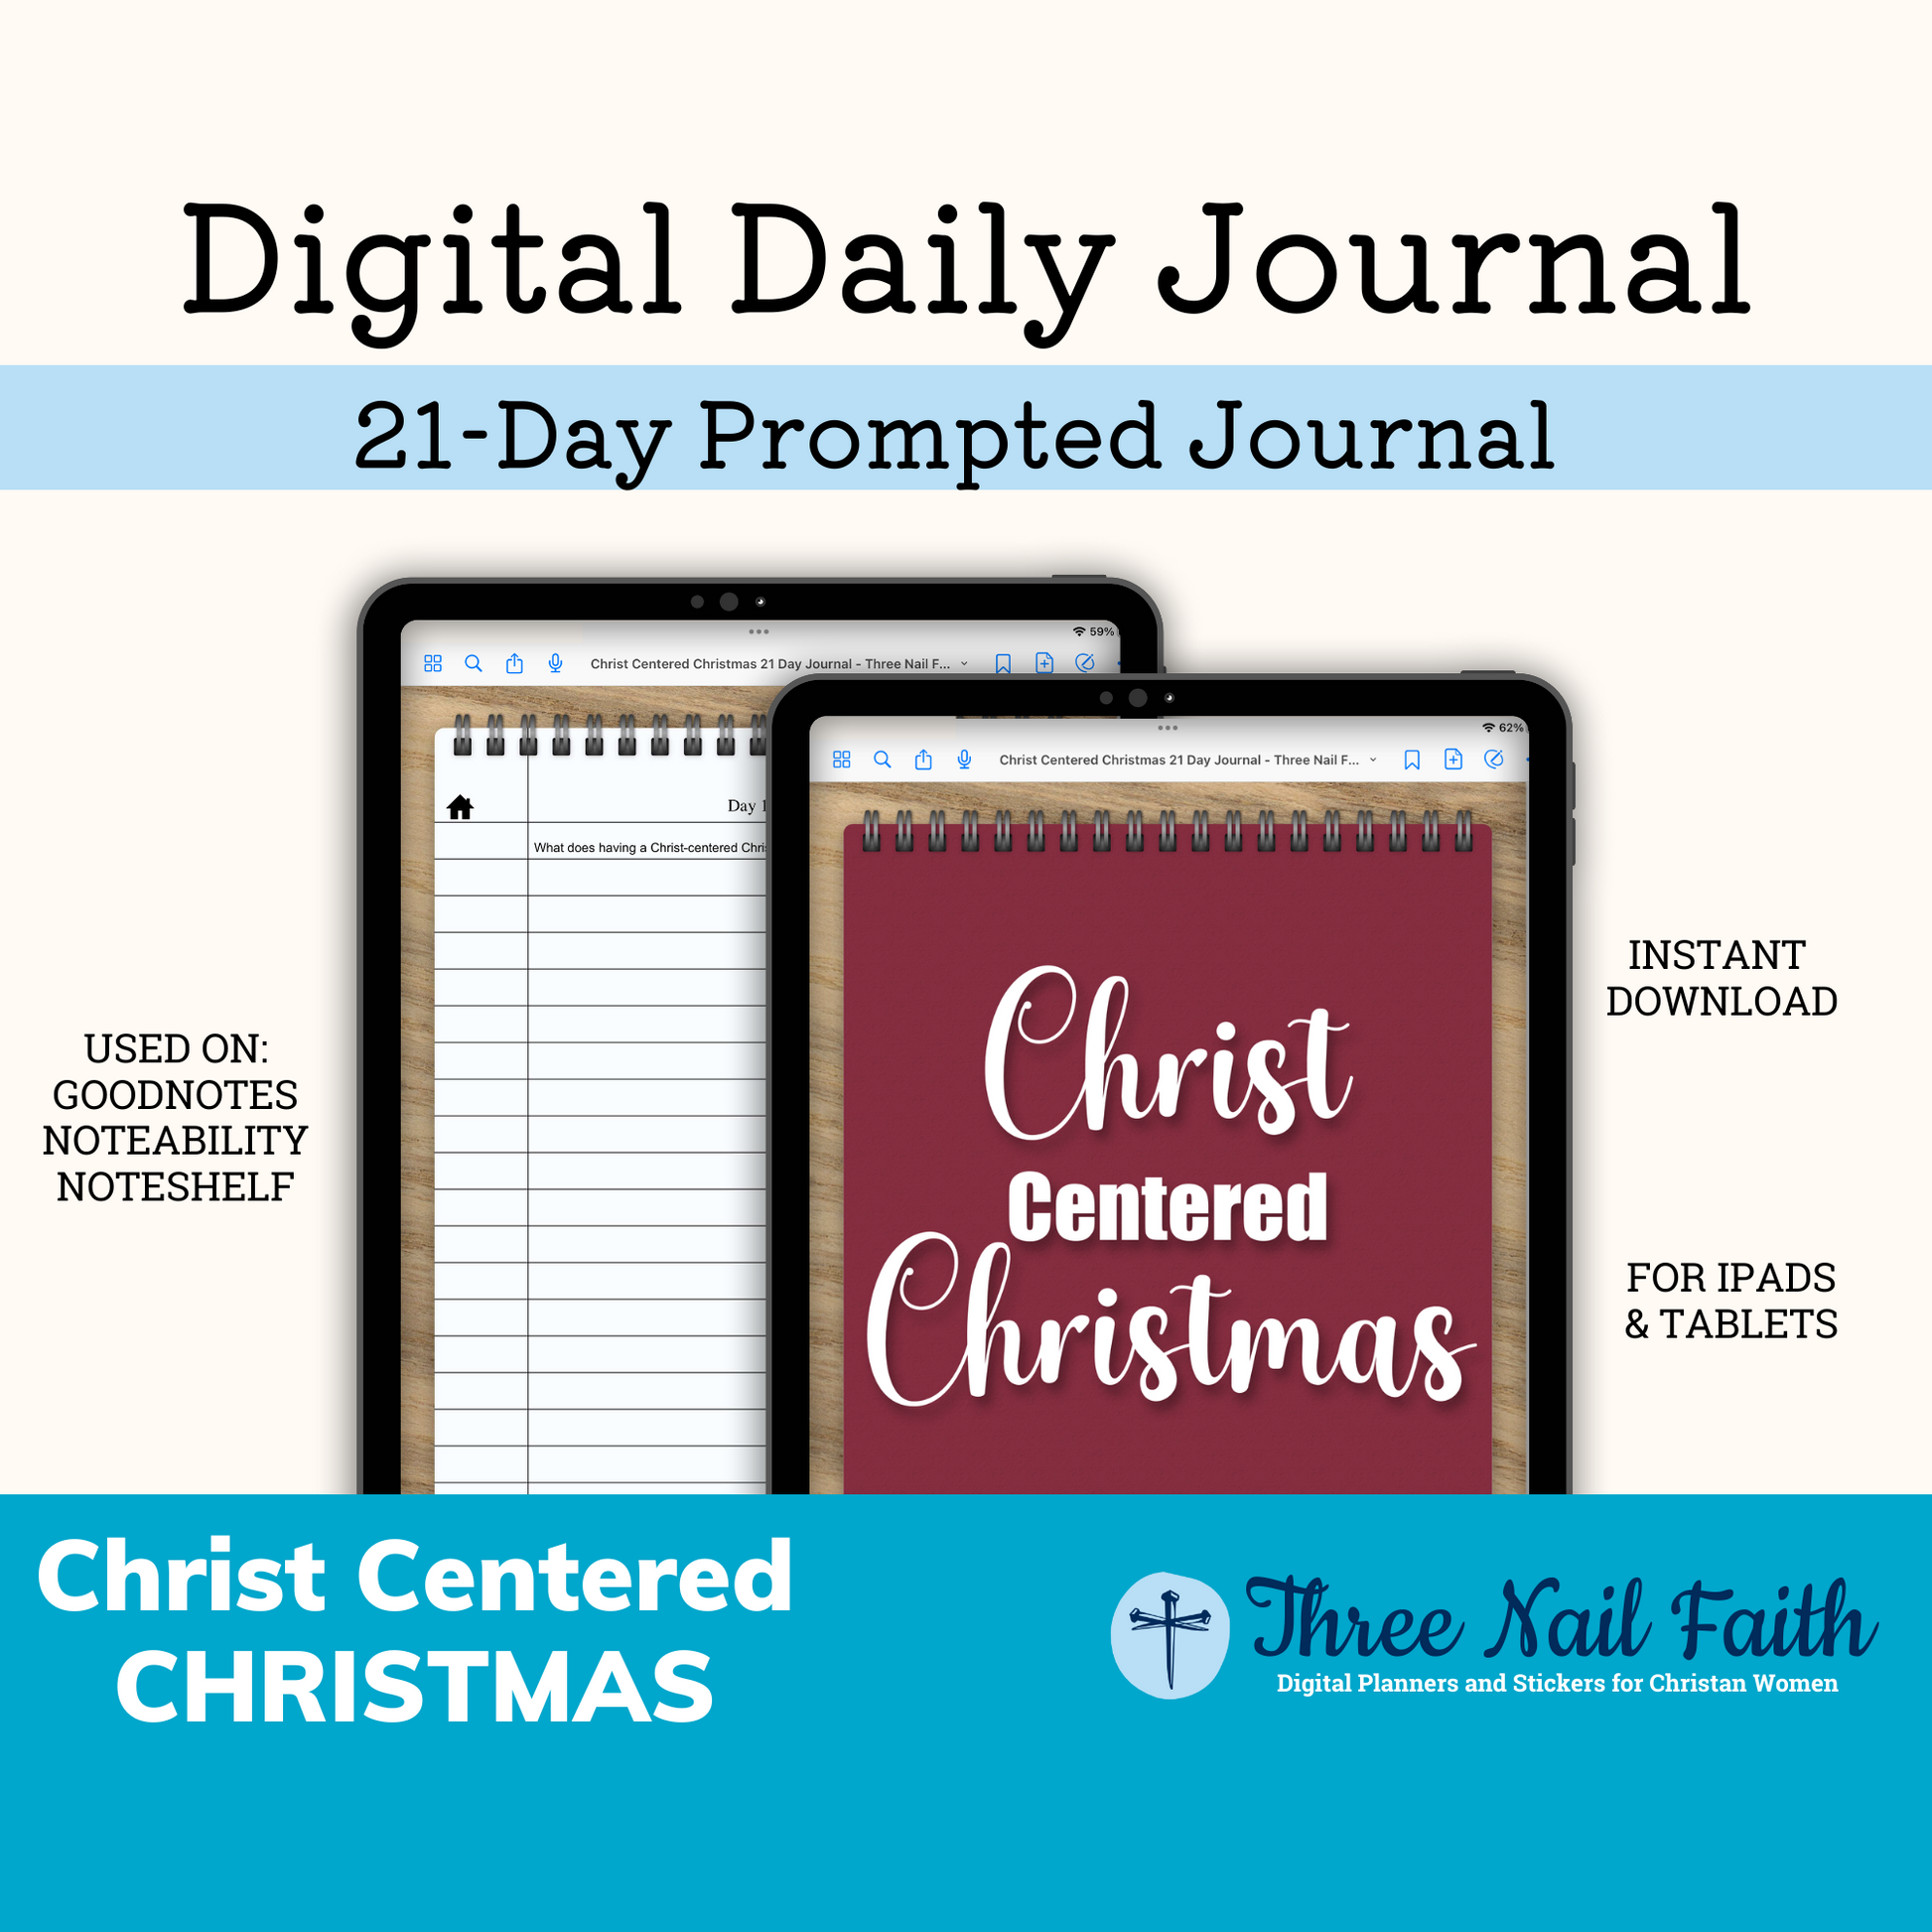 21 Day prompted journal about Christ Centered Christmas